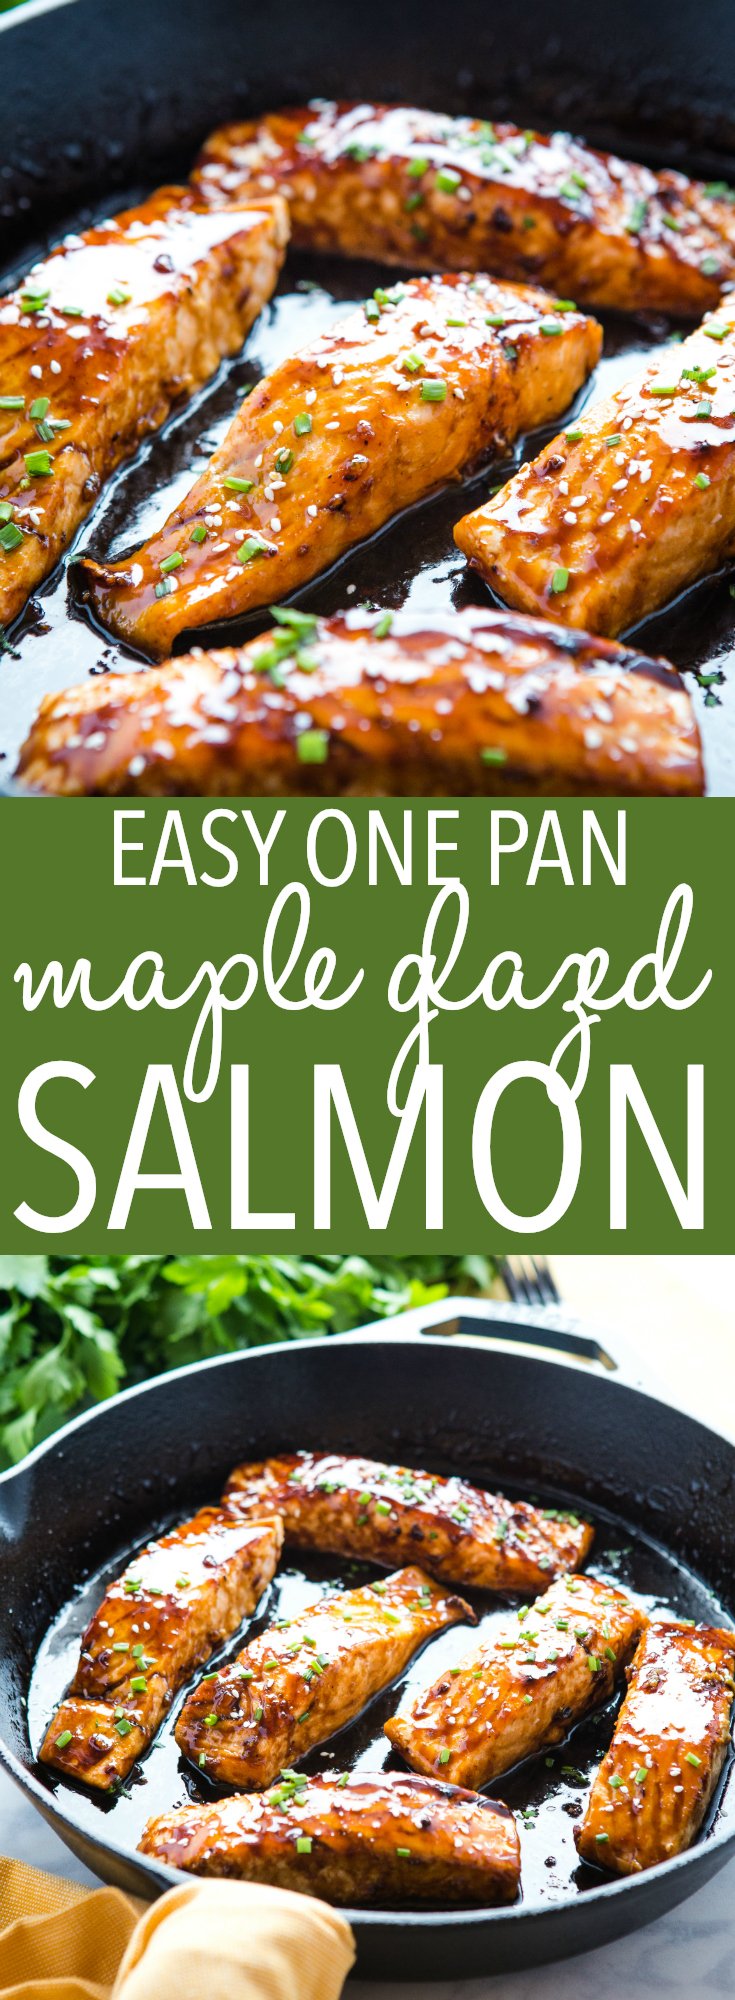 This Easy One Pan Maple Glazed Salmon is the perfect main dish for salmon lovers! Juicy salmon fillets caramelized in an easy maple glaze, on the table in under 20 minutes! Recipe from thebusybaker.ca! #salmon #mapleglazed #castiron #lodgecastiron #onepan #mealidea #easyrecipe #fish #seafood via @busybakerblog